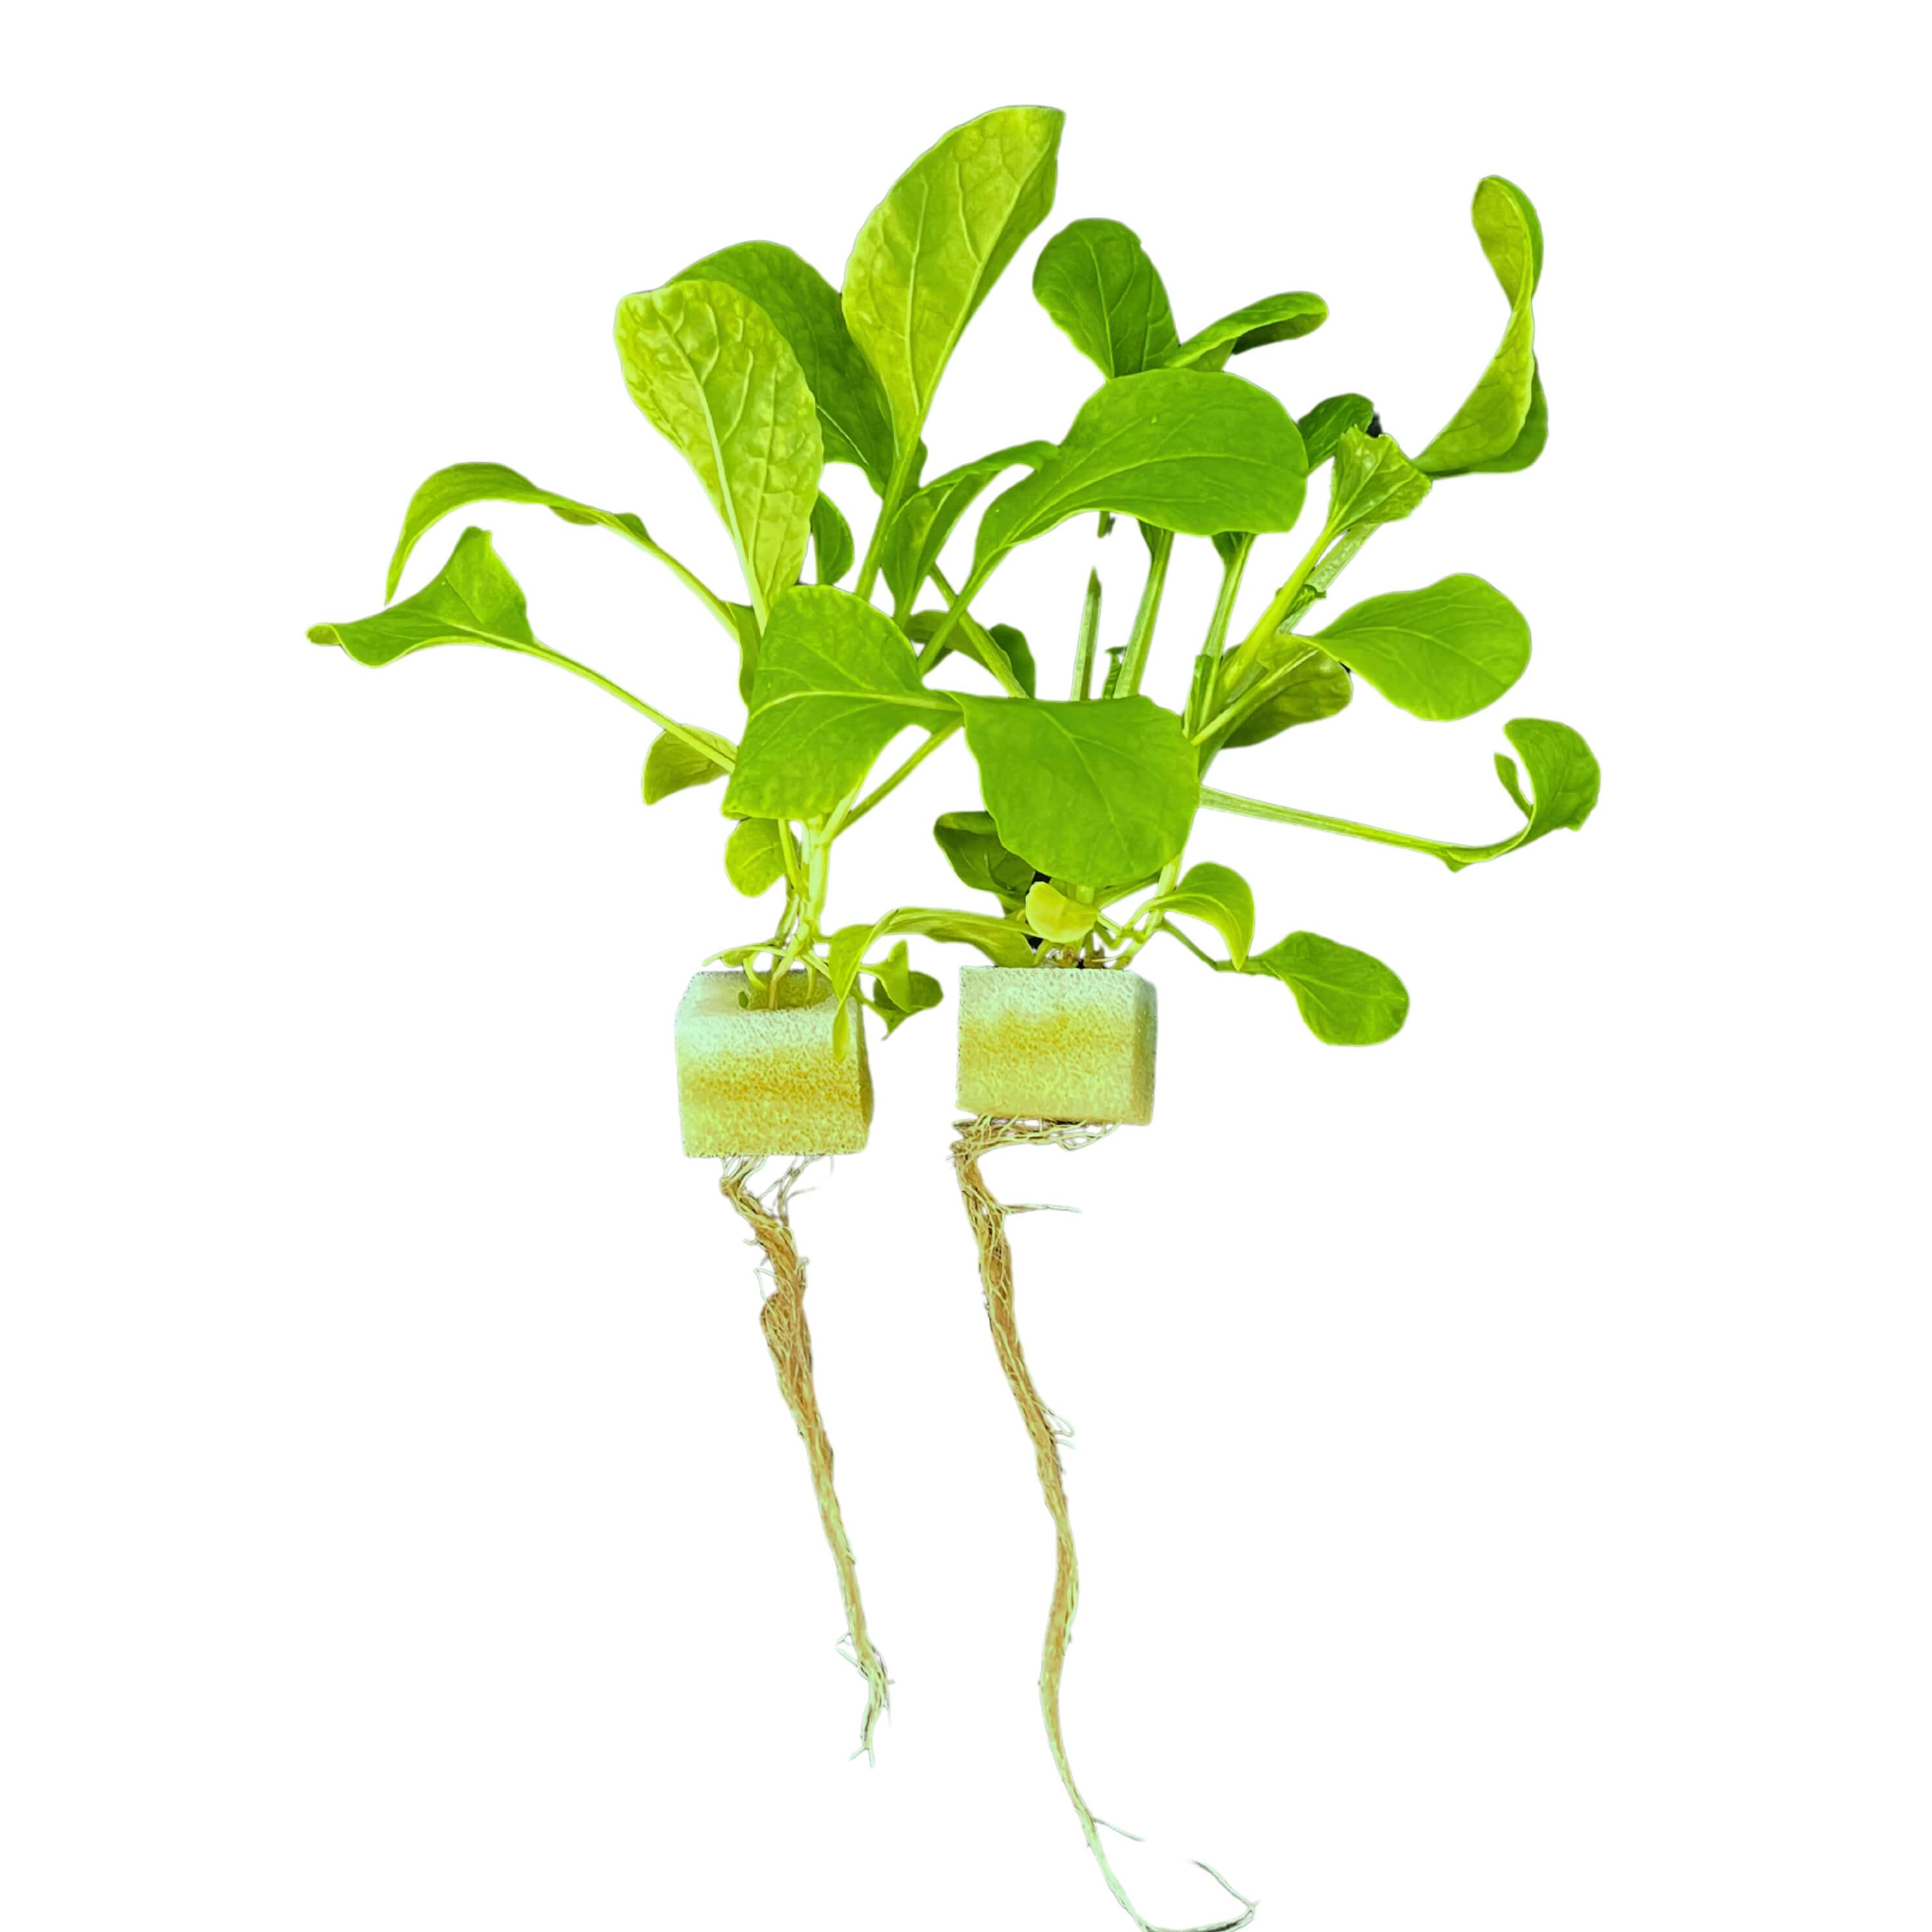 Shanghai Baby Bok Choy(Subscription Only)